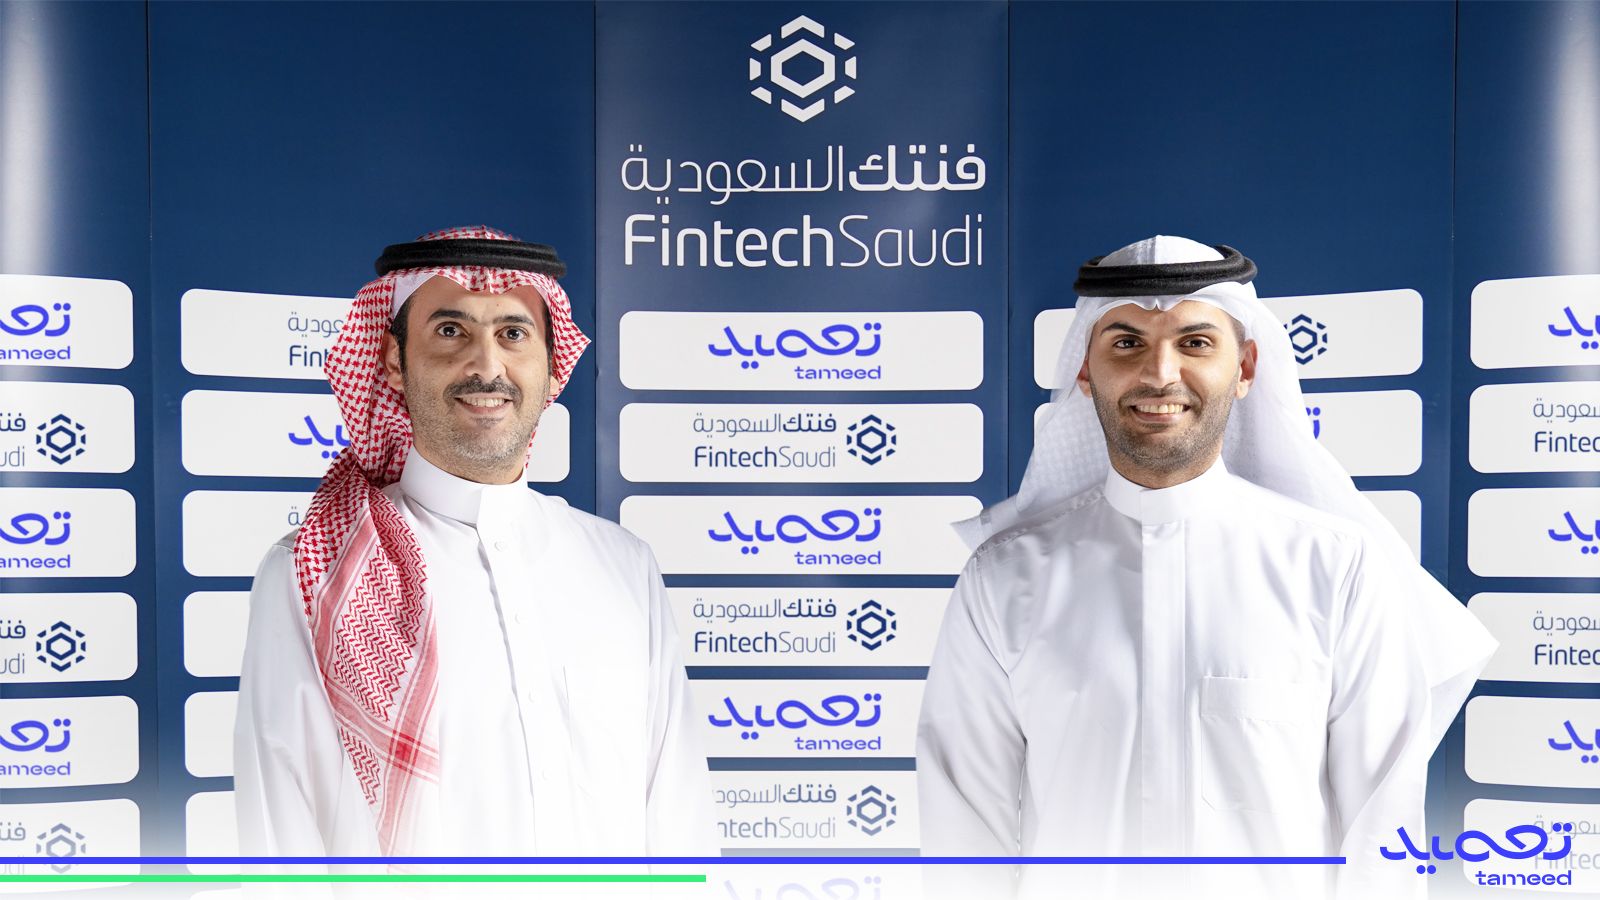 Tameed Platform Closes Series A Funding Round of SAR 56.75 Million (USD 15 Million) Led by Alromaih Investment Group